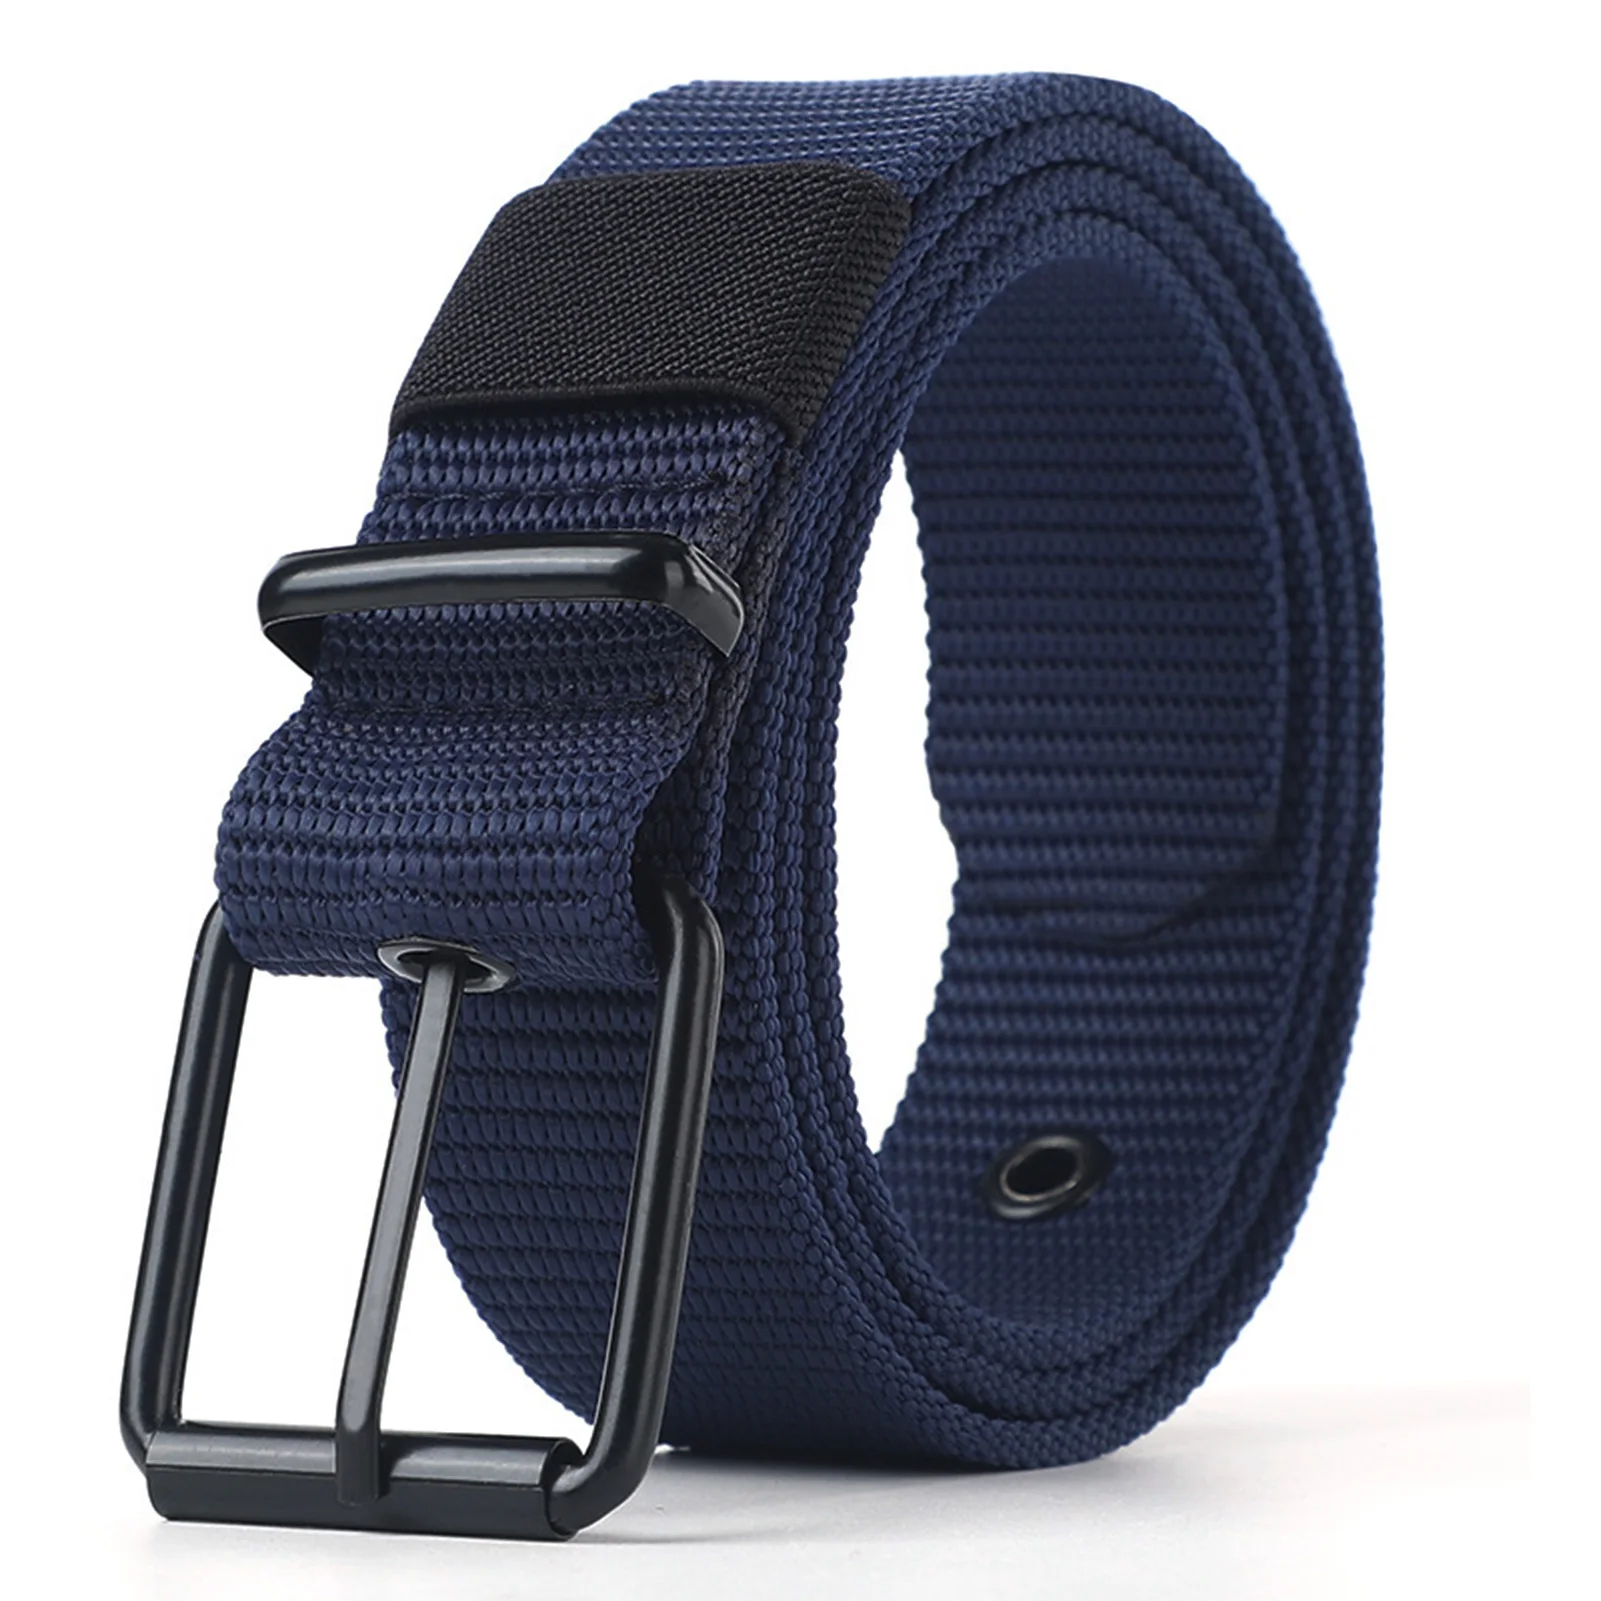 

Men's Nylon Casual Belt Sturdy Lengthen Decorative Smooth Male's Belt for Business Working Office